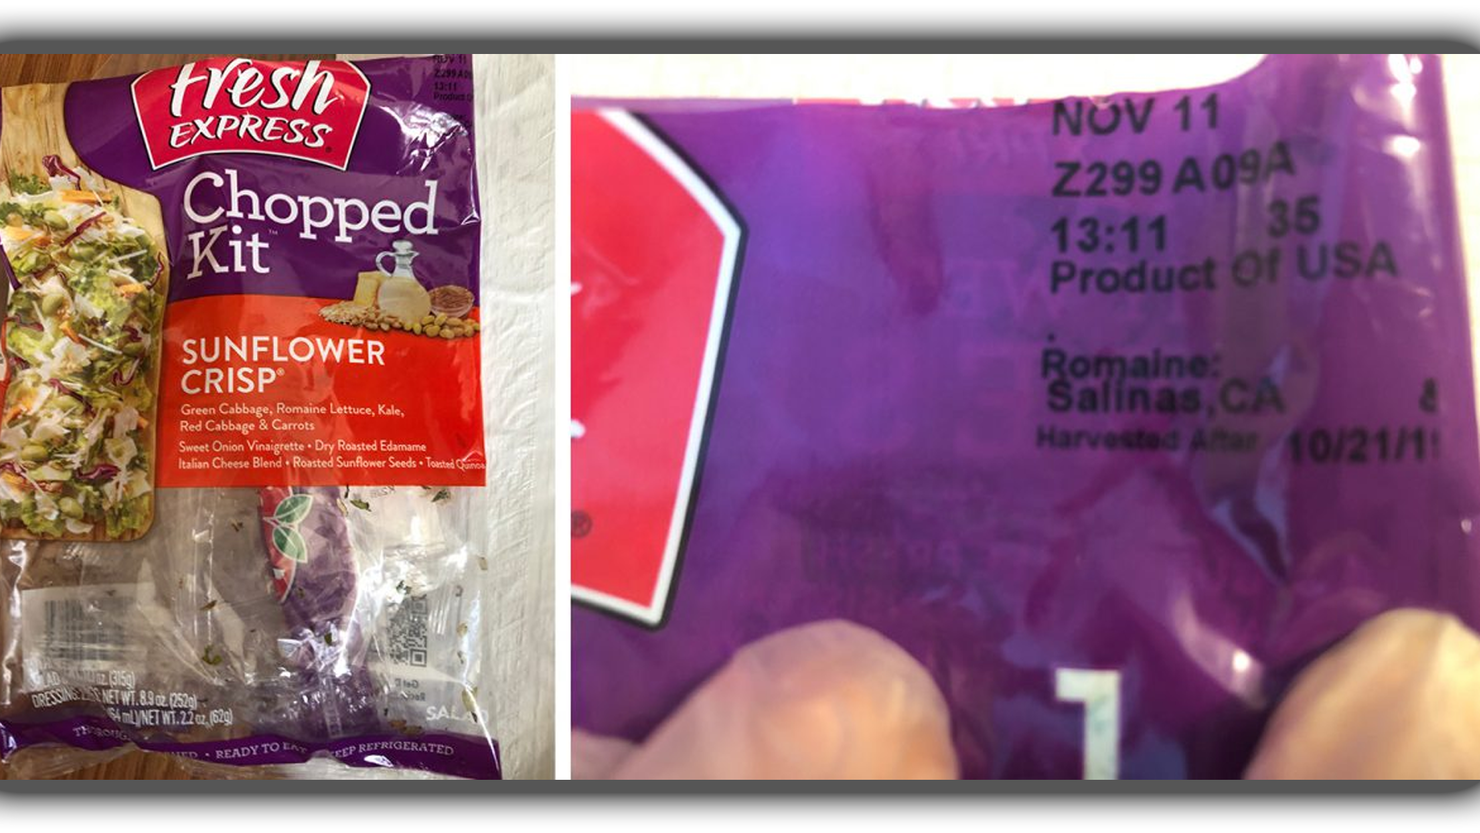 Salad kit recalled by CDC